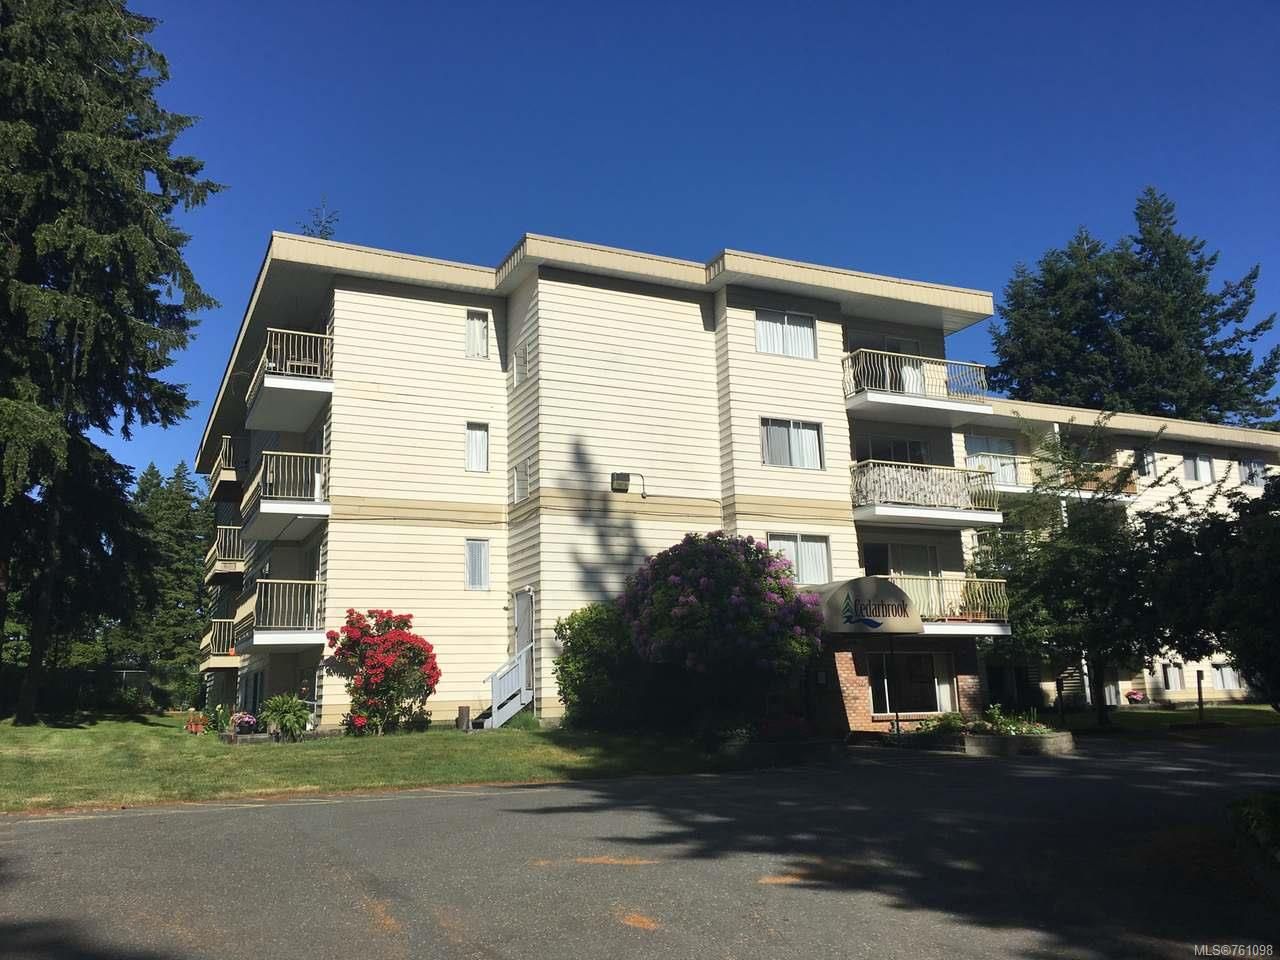 Main Photo: 410 322 BIRCH STREET in CAMPBELL RIVER: CR Campbell River Central Condo for sale (Campbell River)  : MLS®# 761098